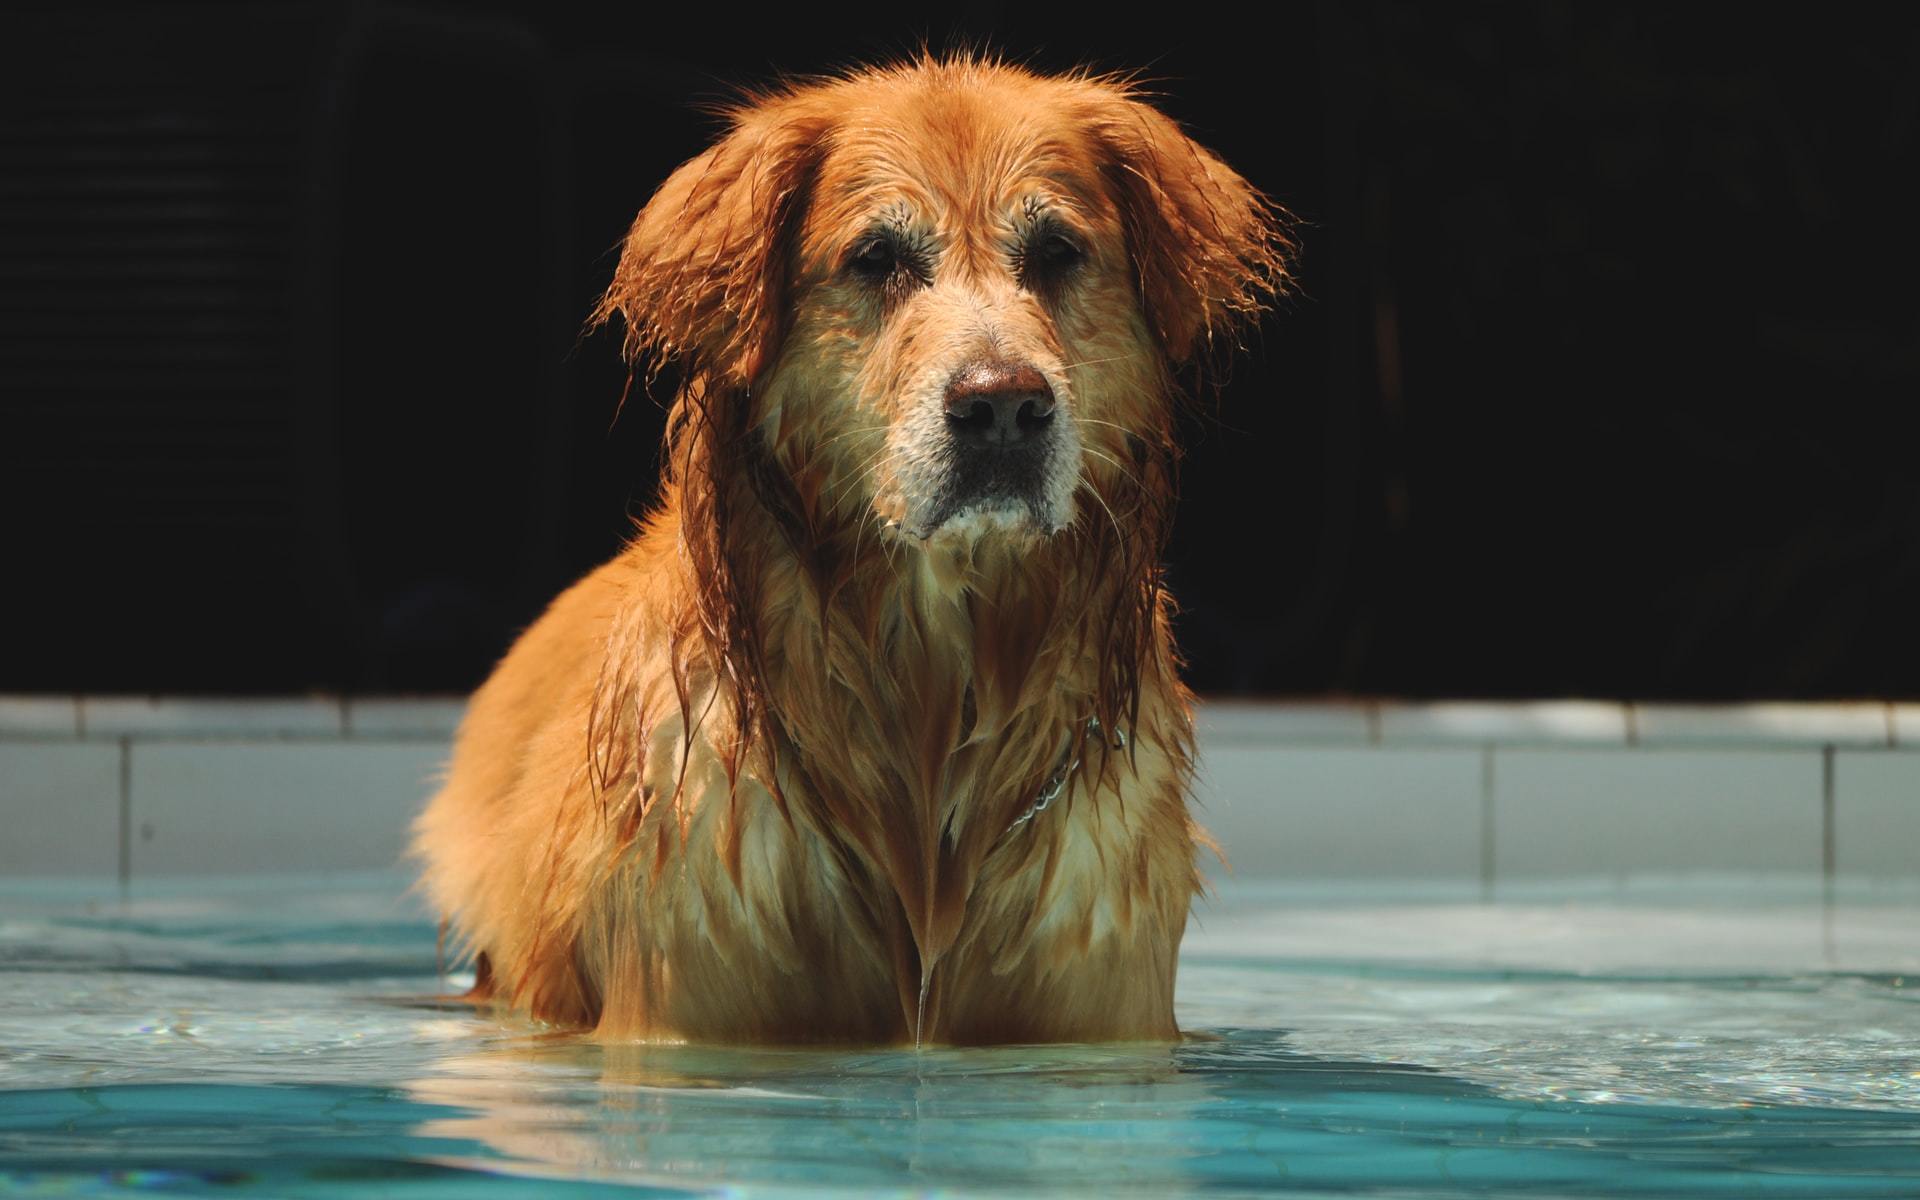 CPR and Care for Drowning Pets | FirstVet